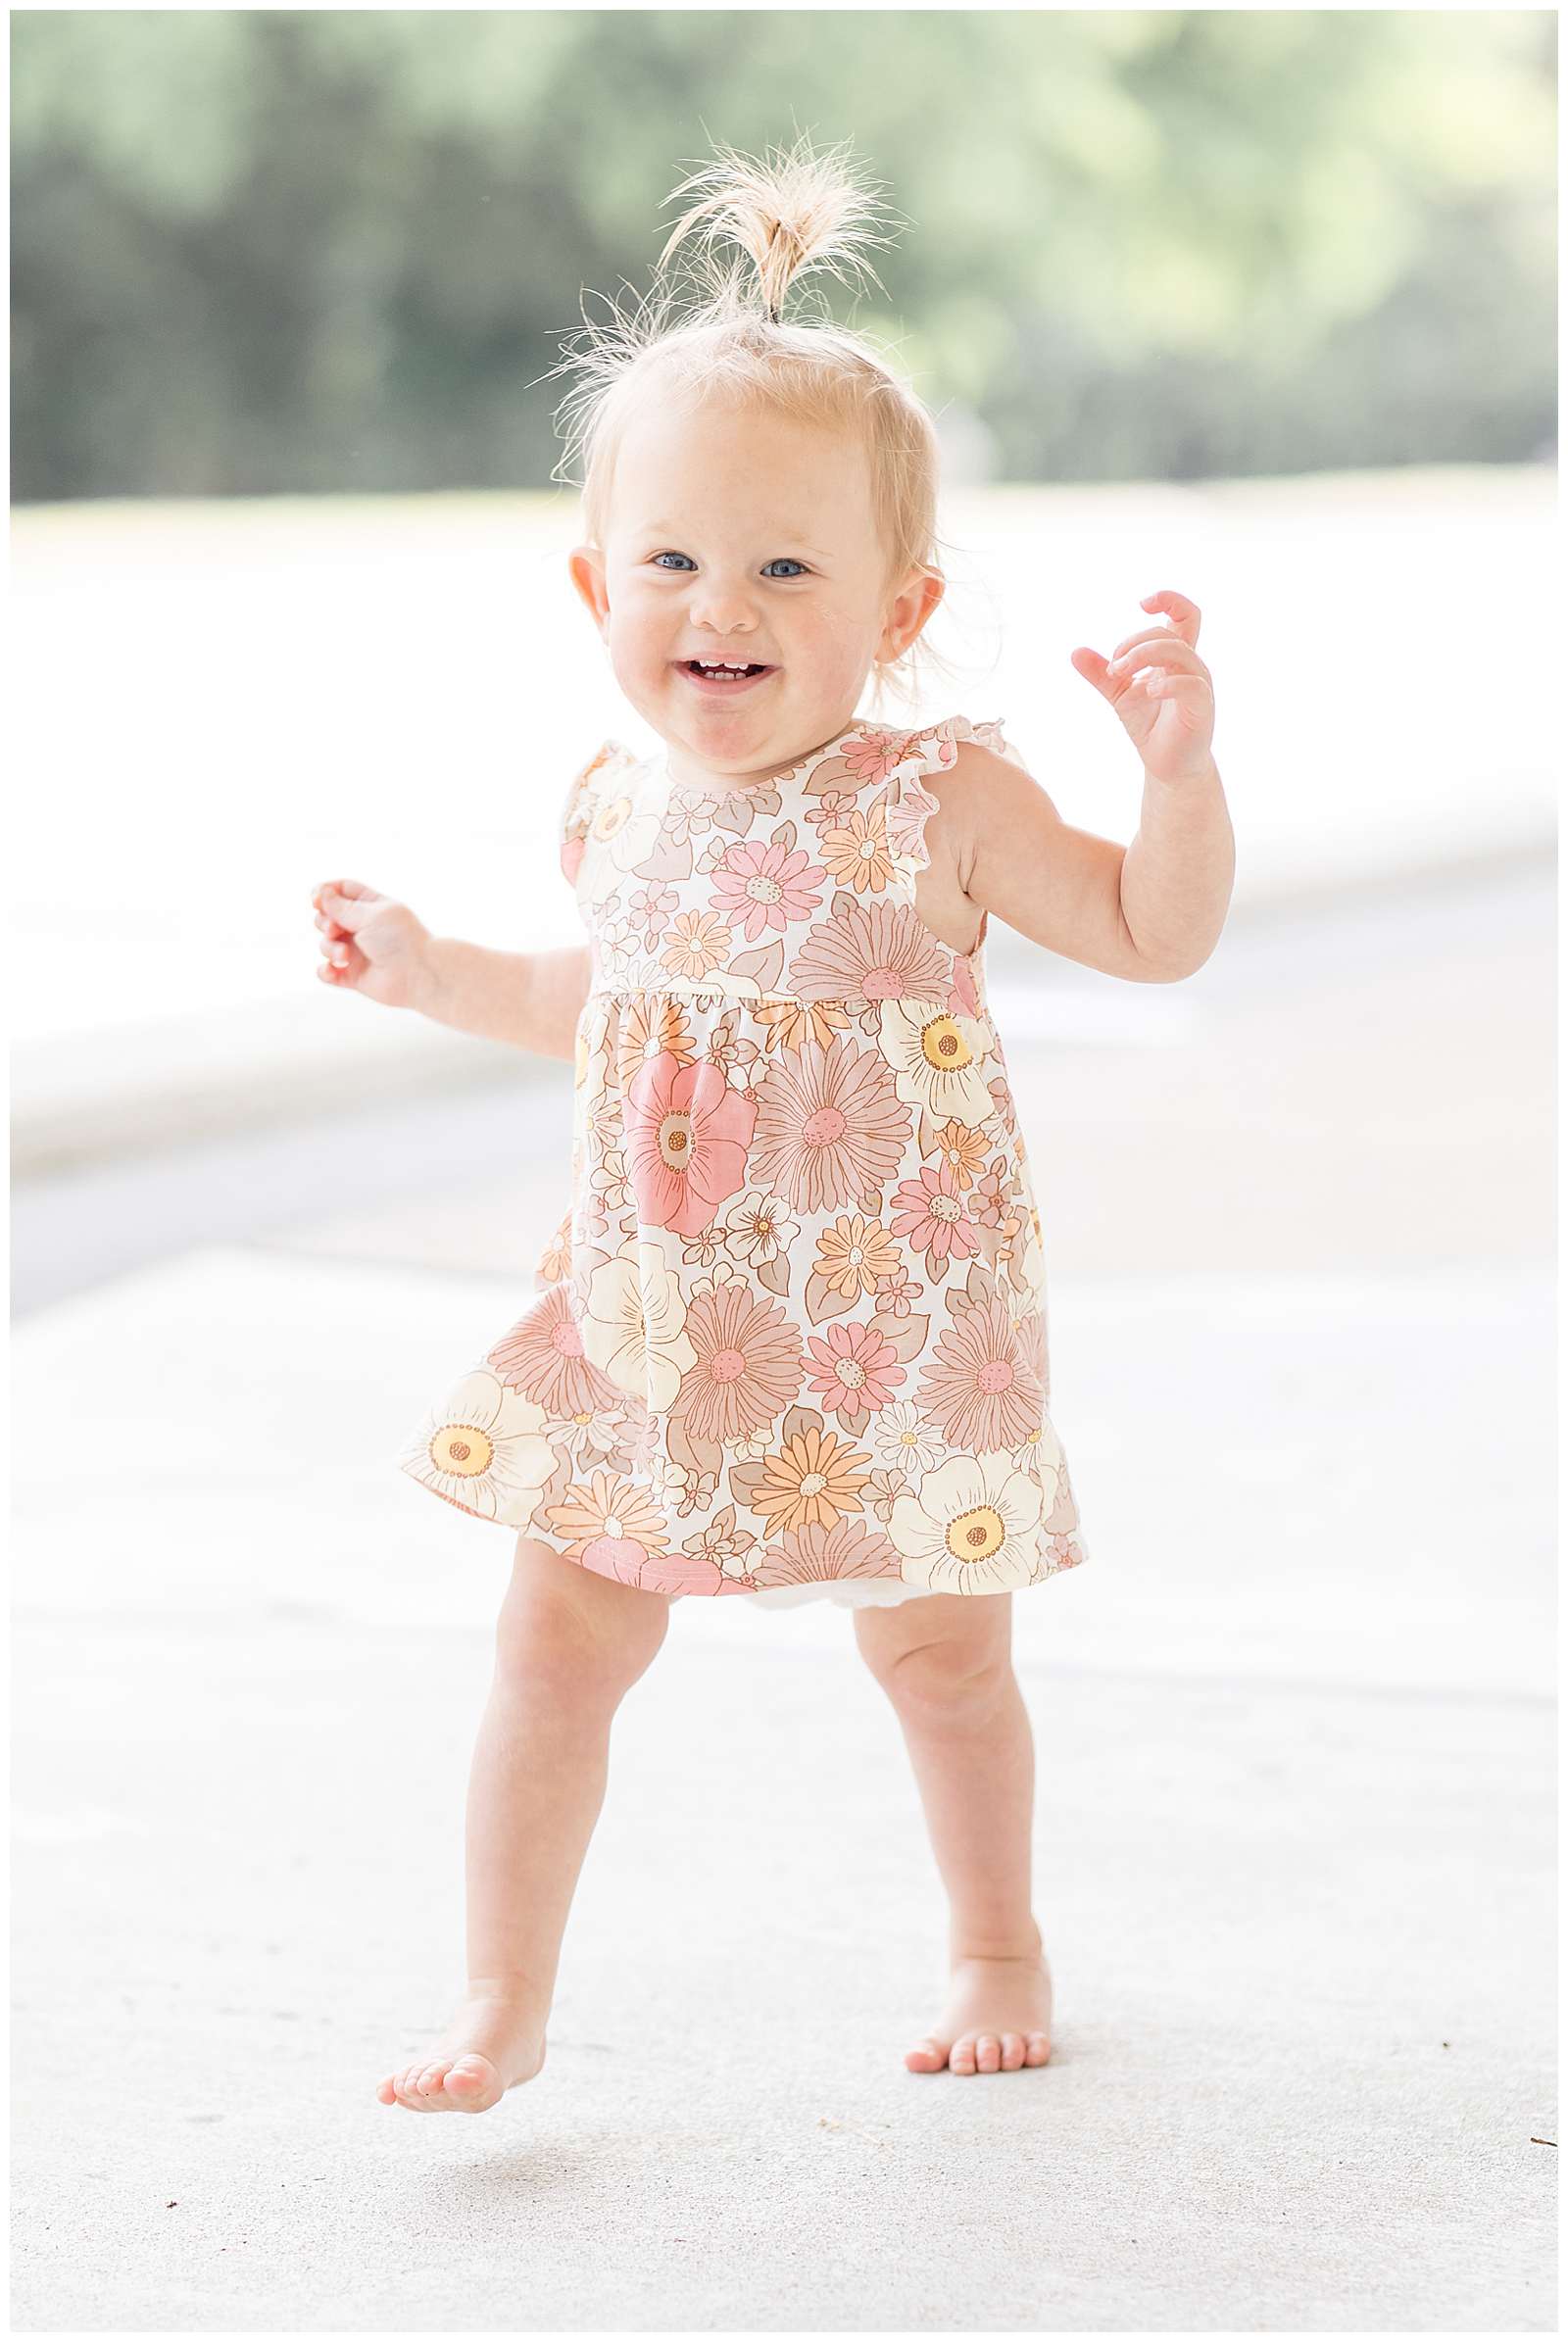 Sweet one year old girl with blonde hair and a whale sprout ponytail is a new walker and excited about taking her first steps. She smiles big at the camera and wears a muted, neutral floral dress with ruffle sleeves and no shoes. Click to see more of this cutie and her twin sister on the blog today! -rebeccaricephoto.com